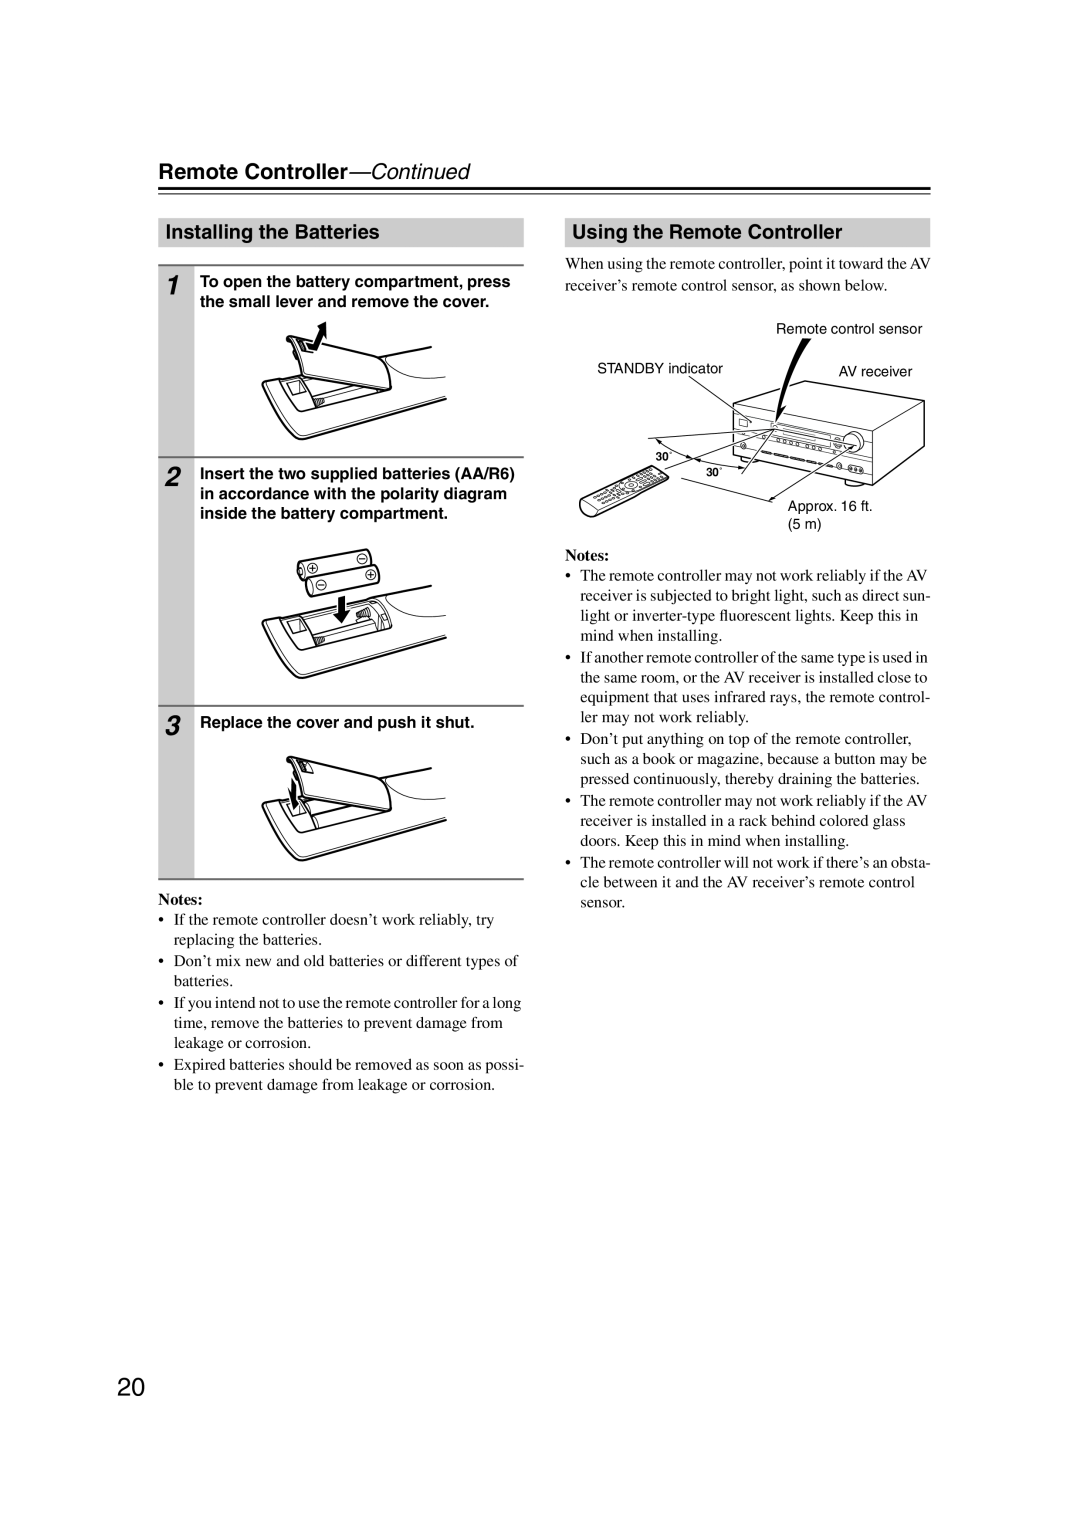 Onkyo HT-S5100 instruction manual Installing the Batteries, Using the Remote Controller, Remote Controller—Continued, Notes 